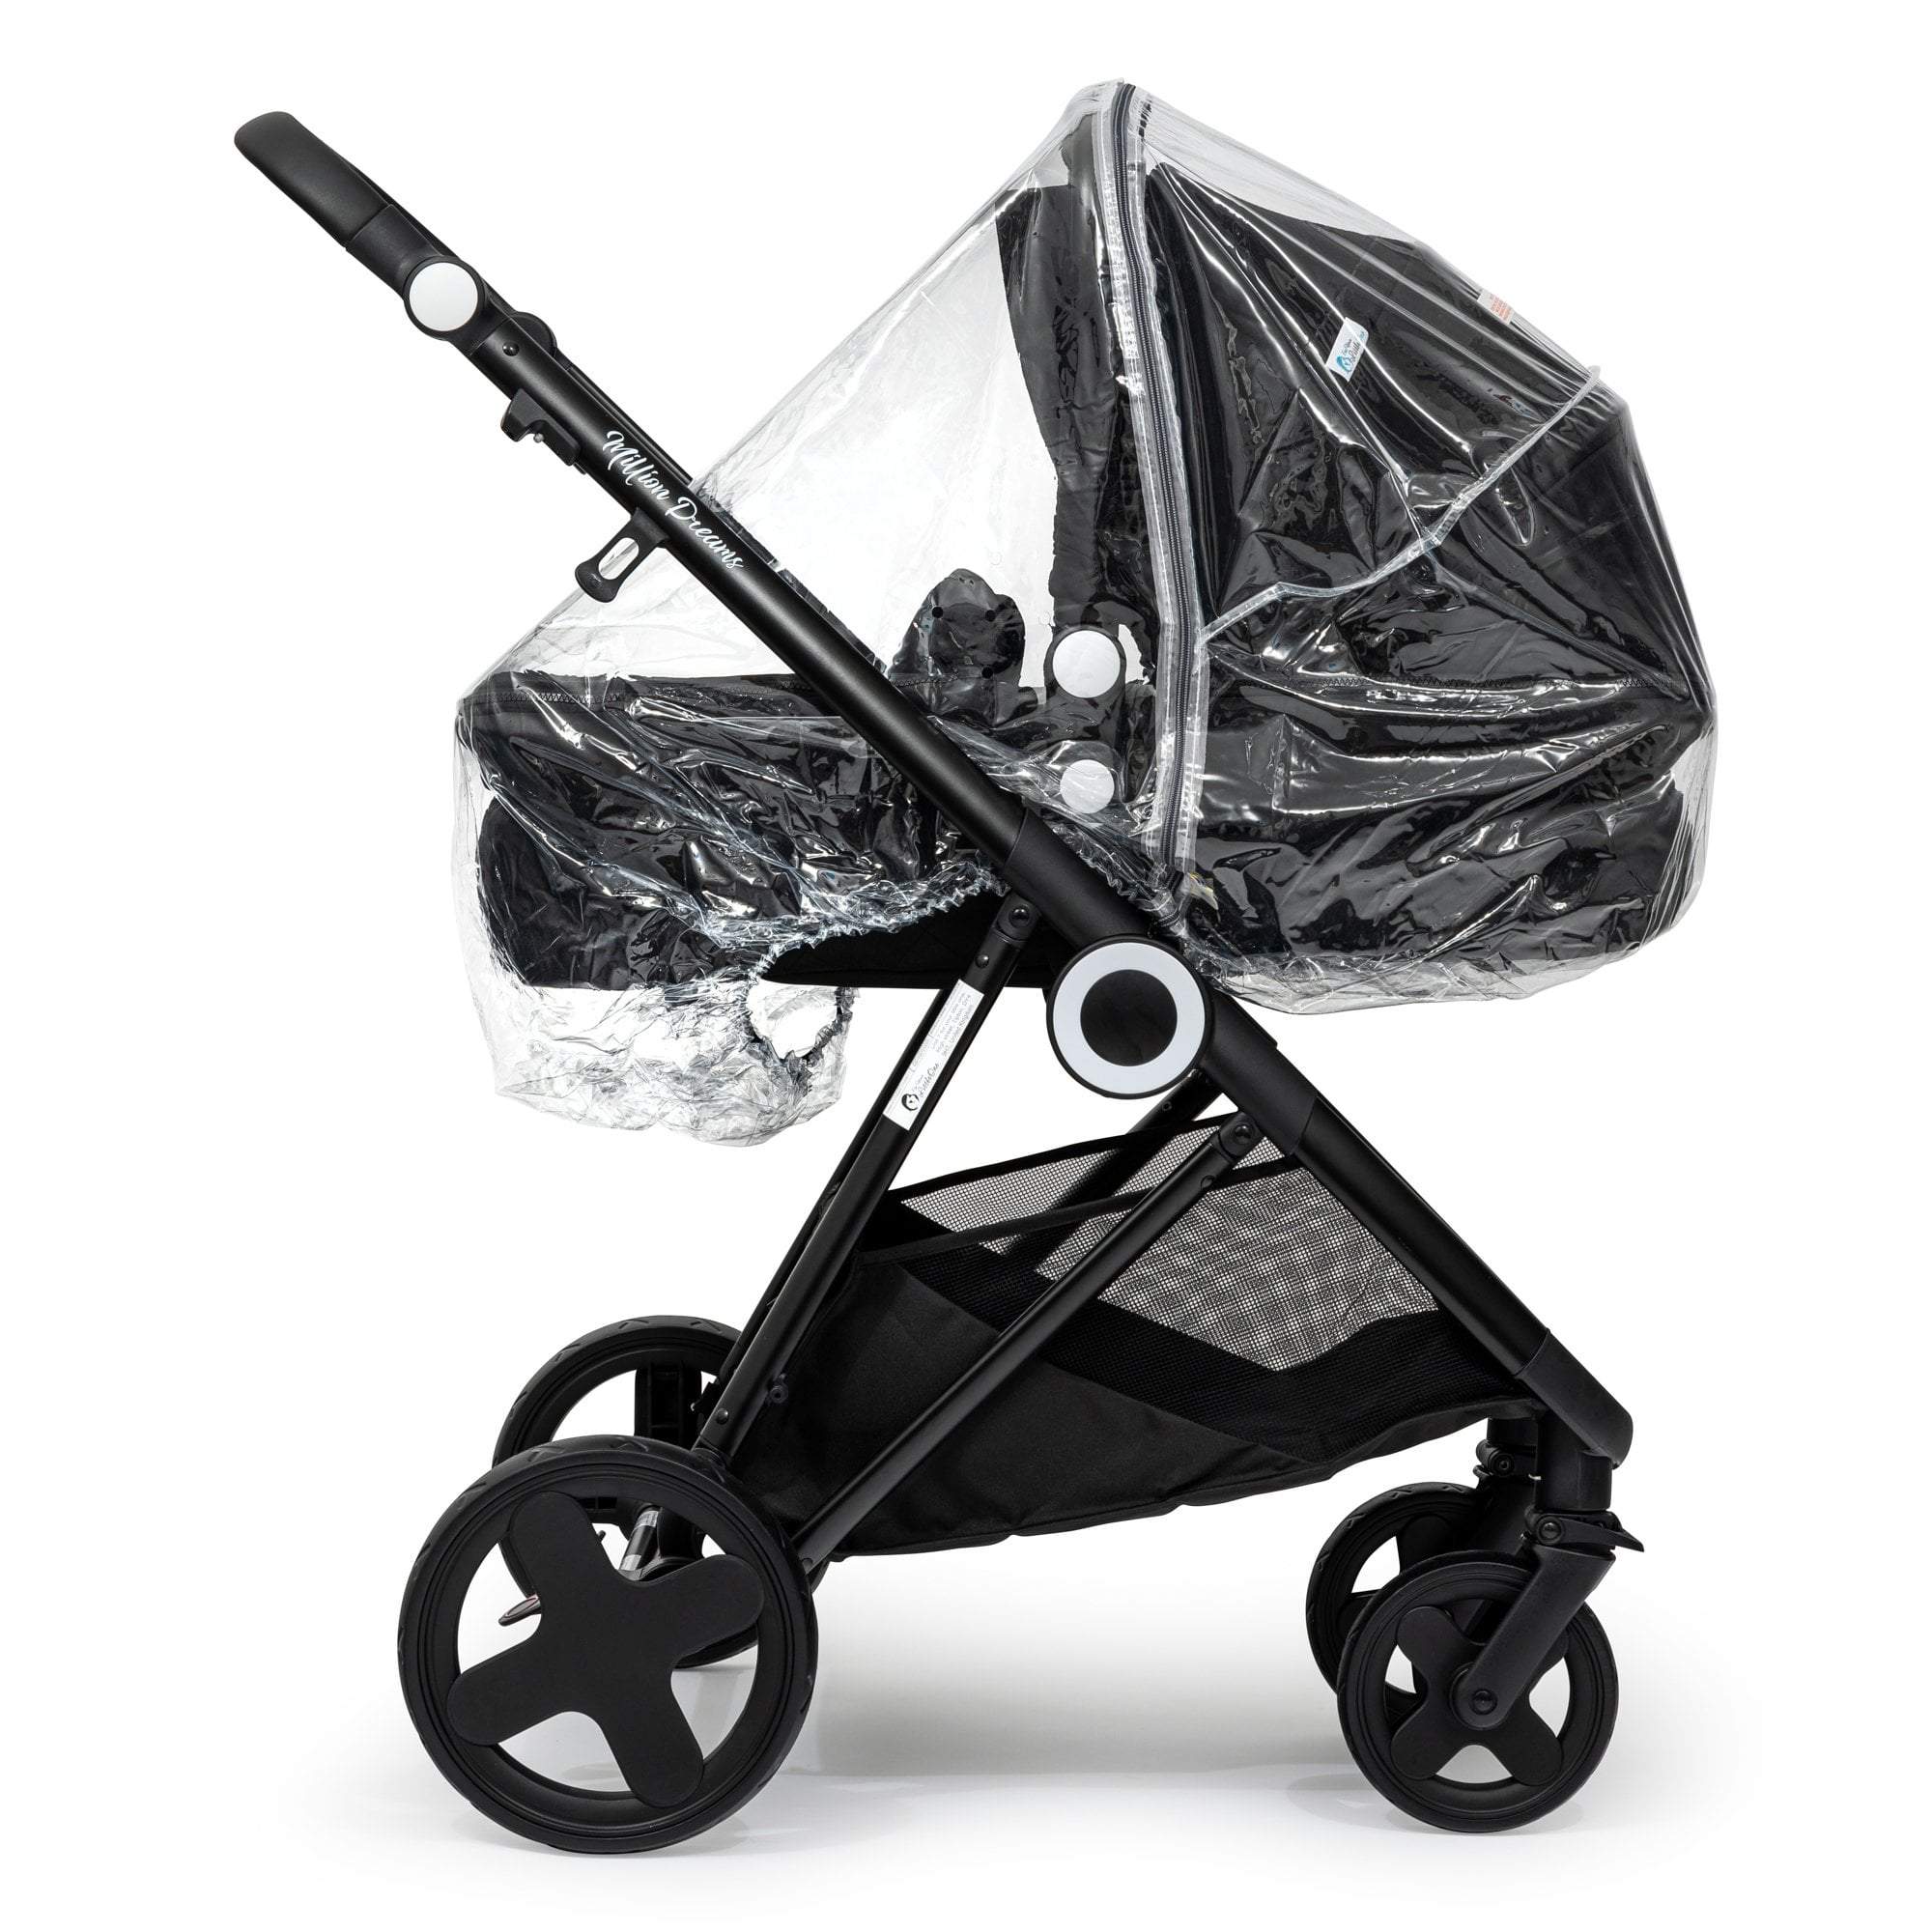 Carrycot Raincover Compatible With Little Shield - Fits All Models - For Your Little One